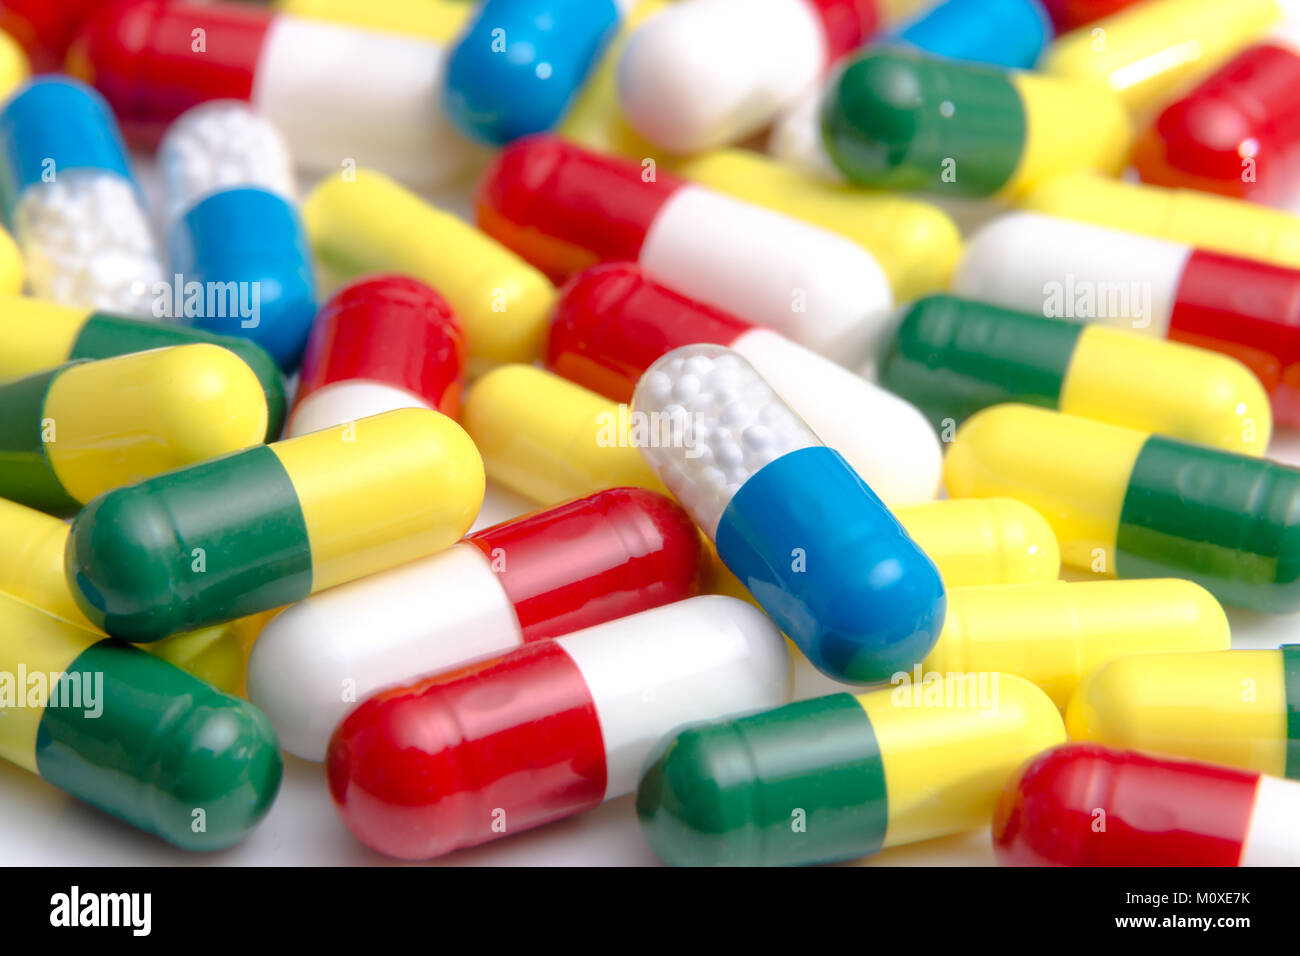 A collection of pills and tablets Stock Photo